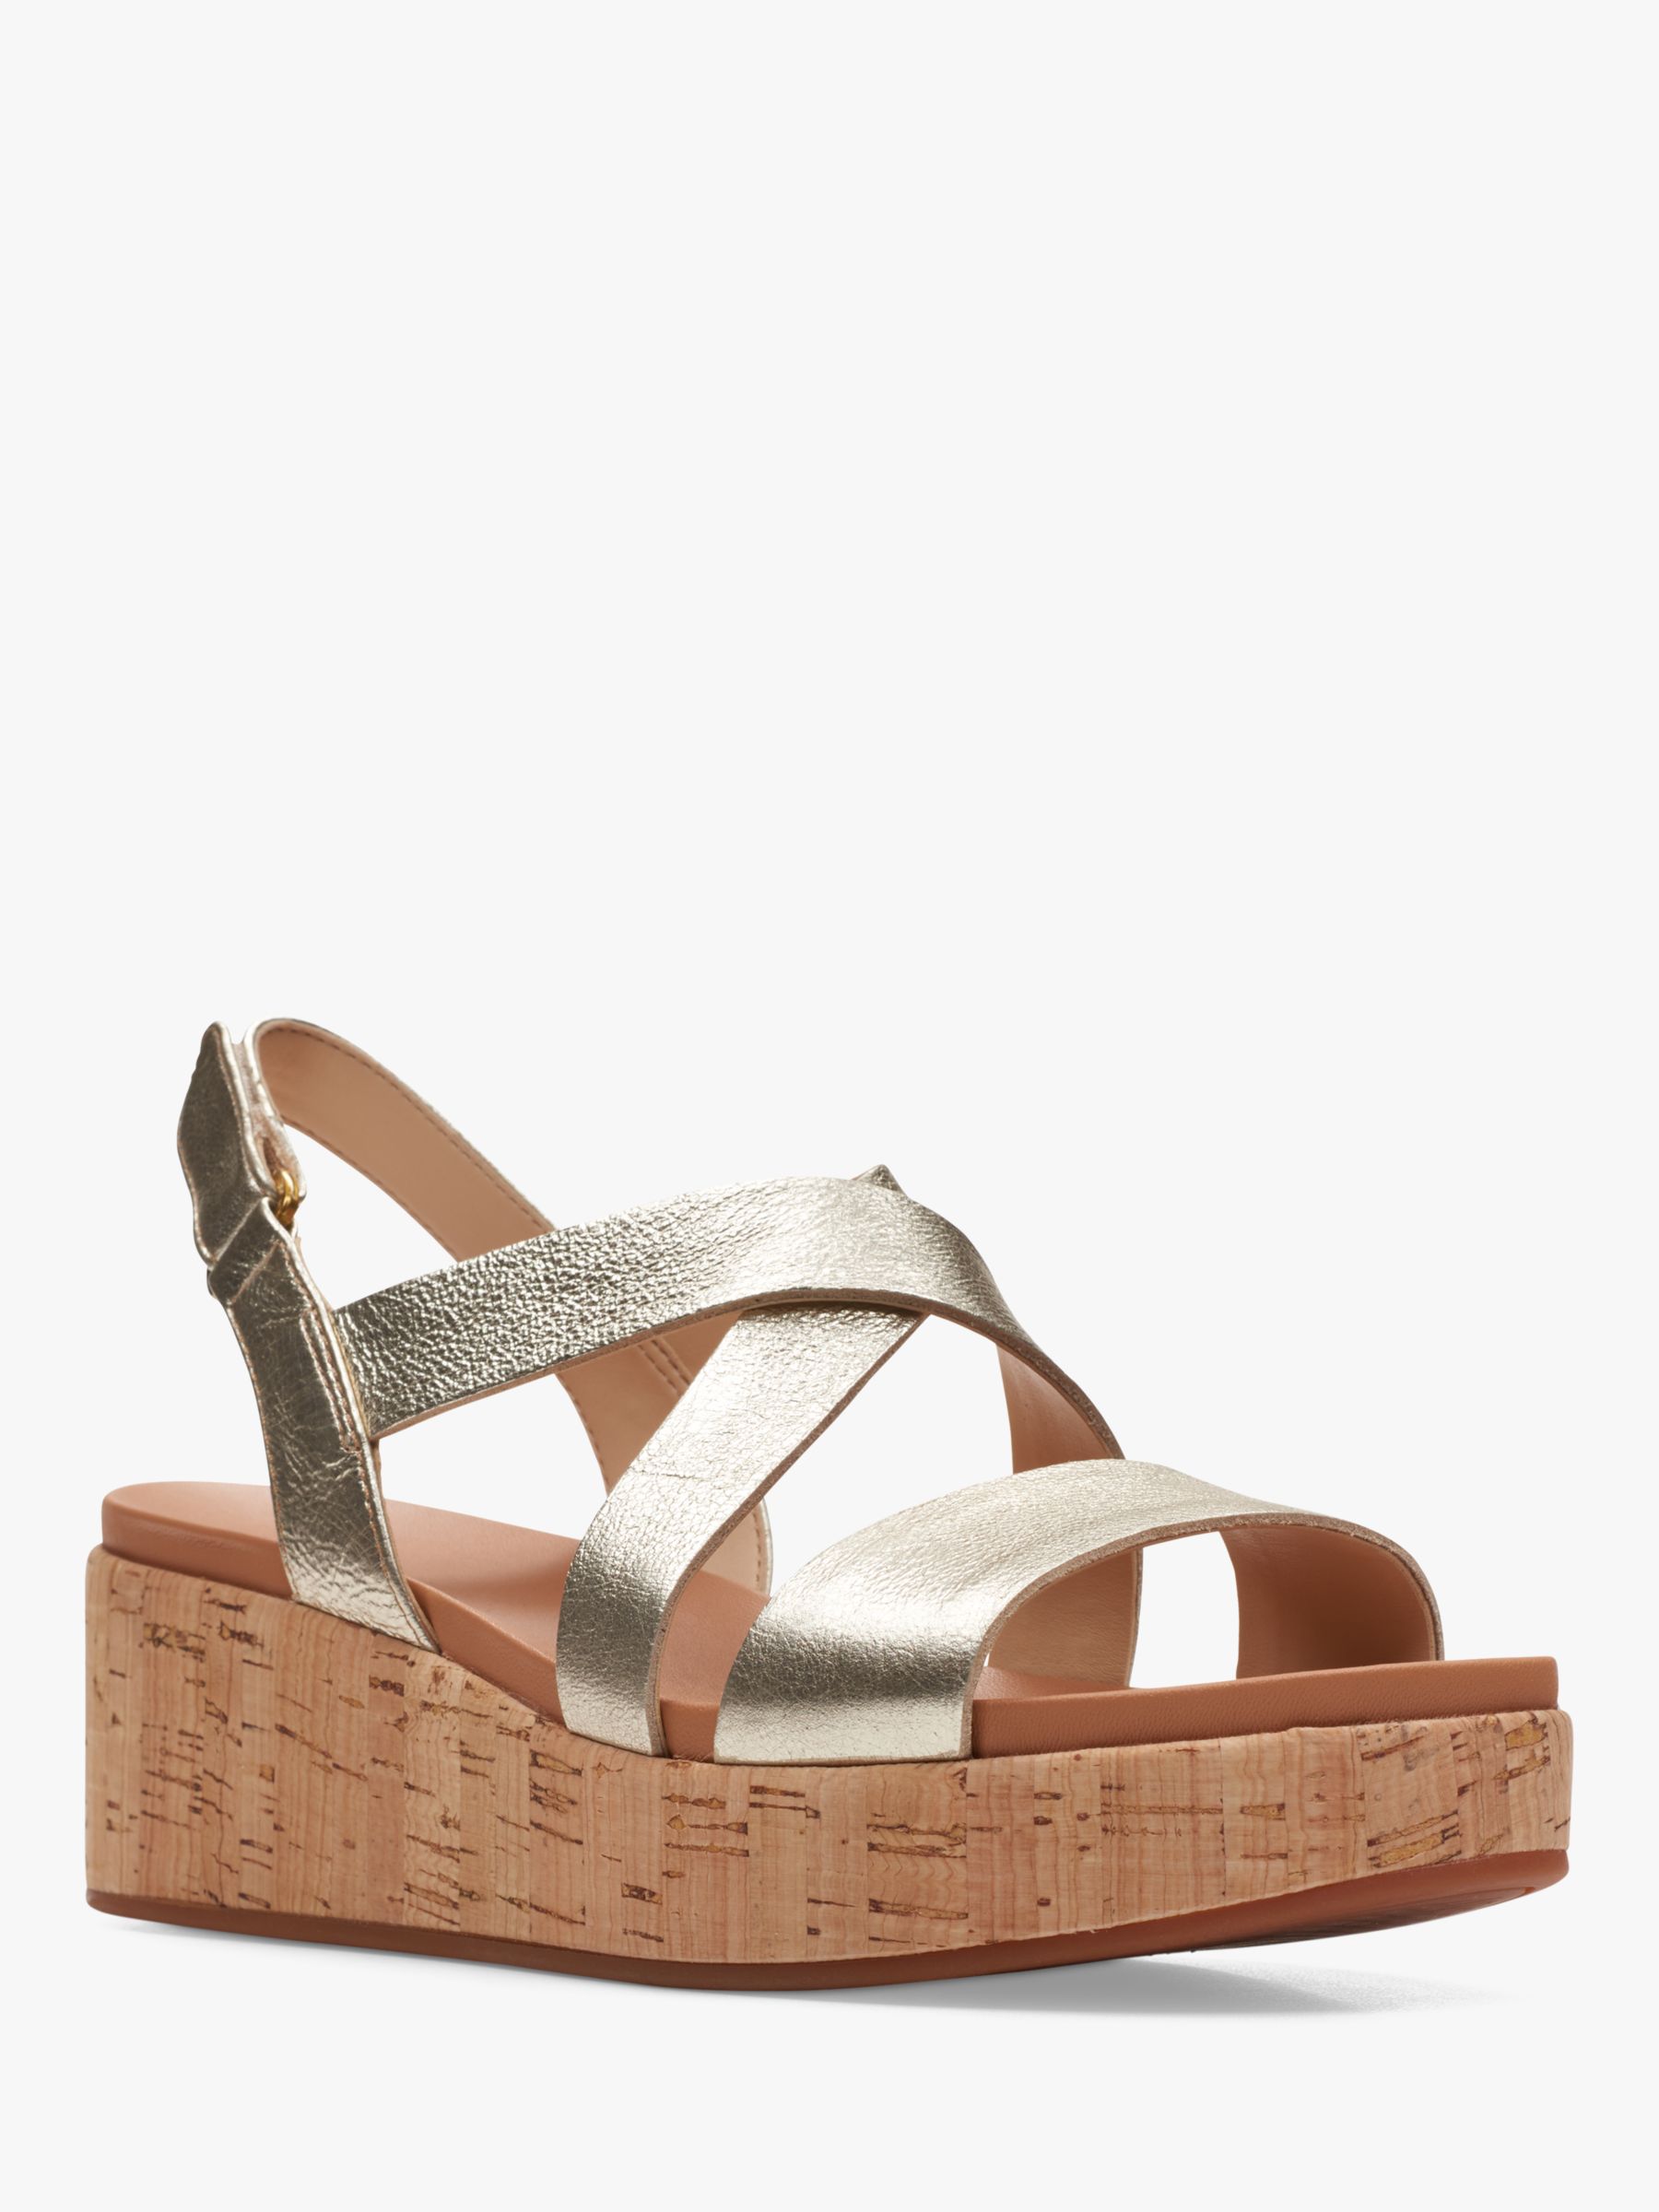 Física Catastrófico mitología Clarks Kimmei Cork Leather Wedge Sandals, Champagne at John Lewis & Partners